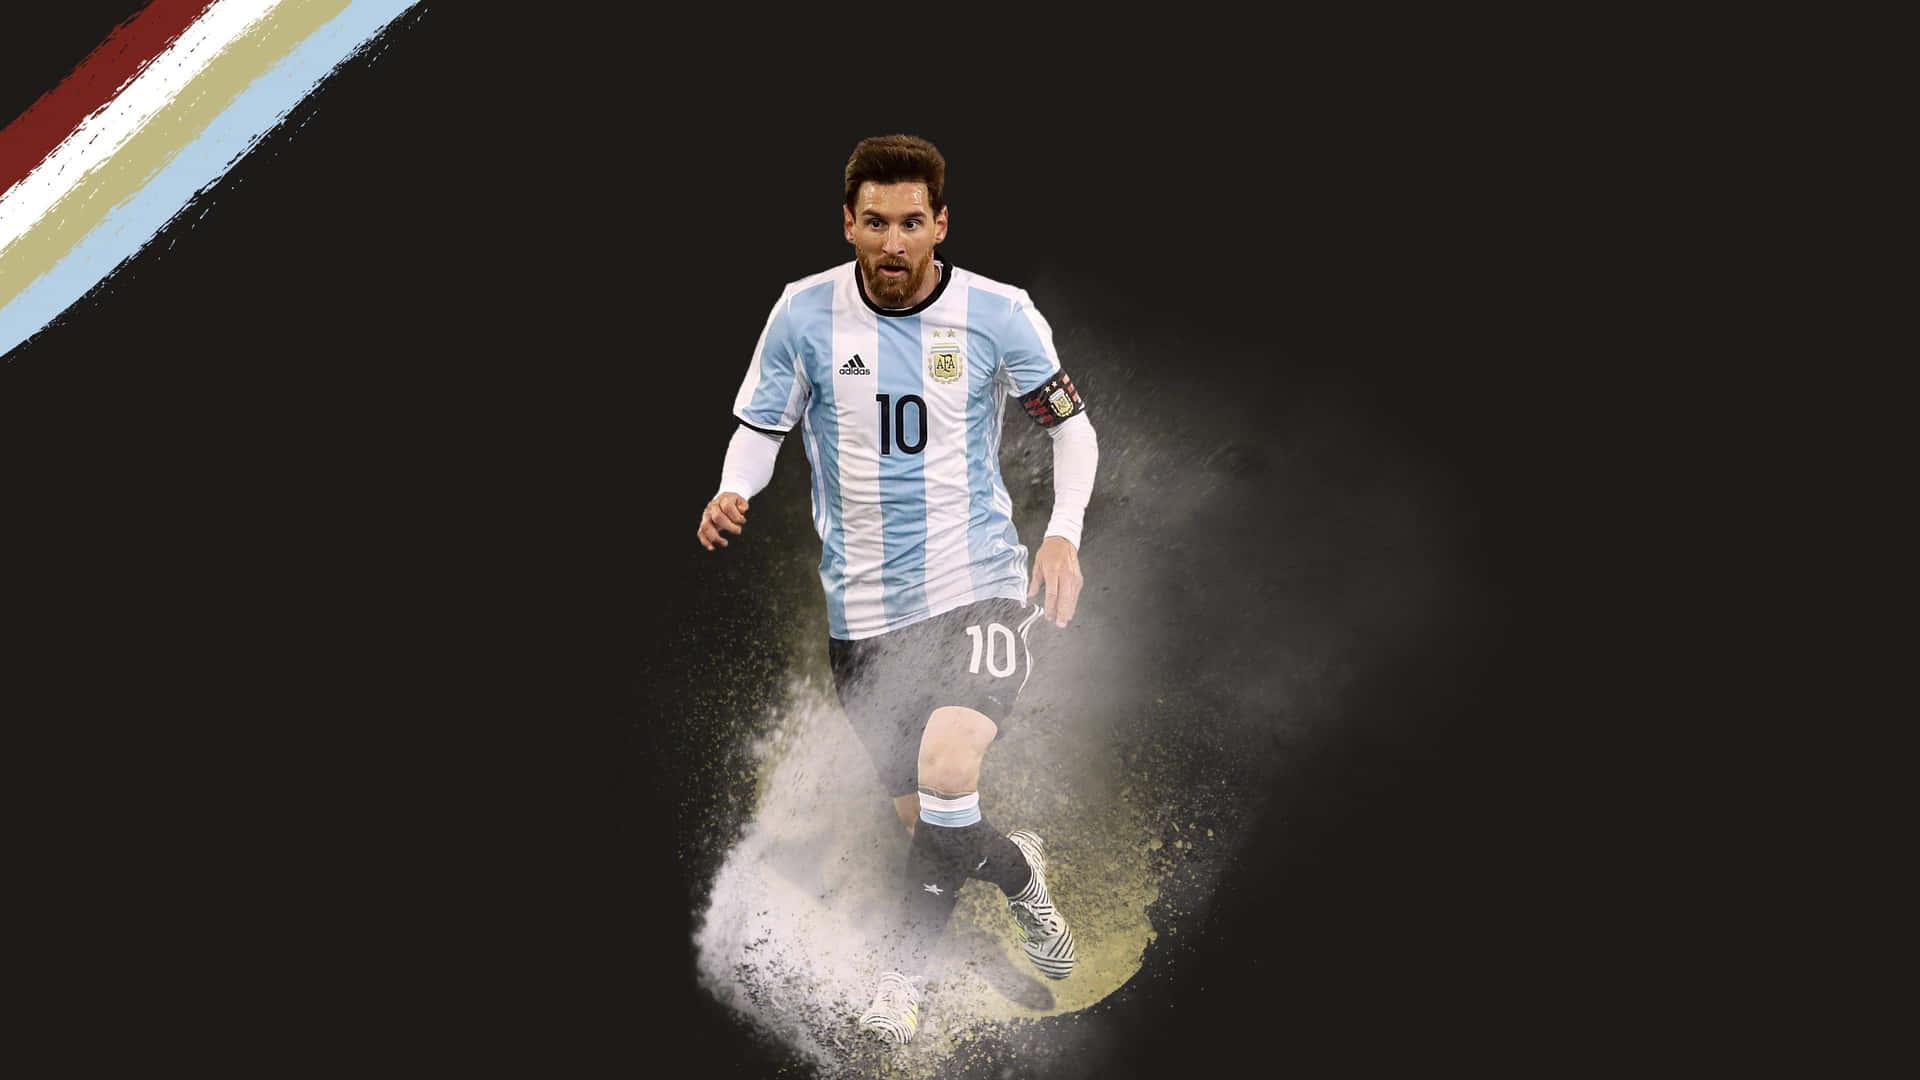 Lionel Messi proving why he is the greatest soccer player of all time.